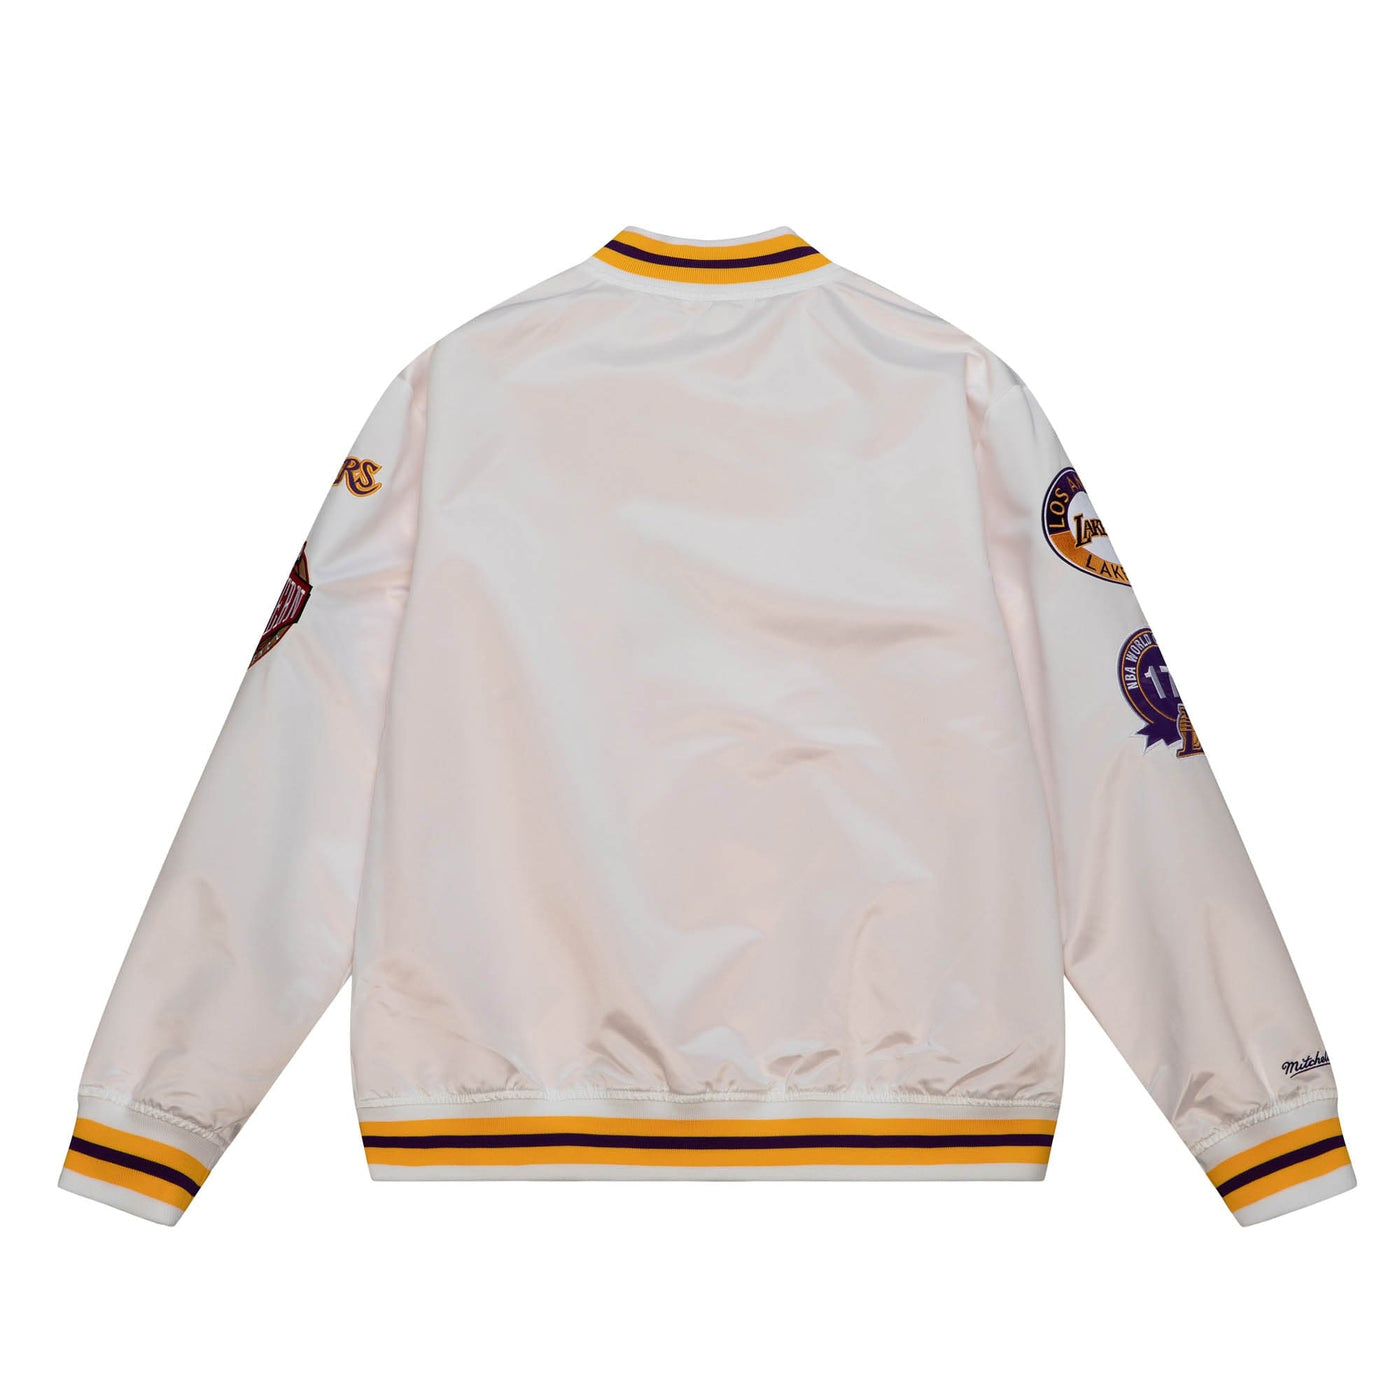 M&N City Collection Light Weight Satin Jacket Los Angeles Lakers